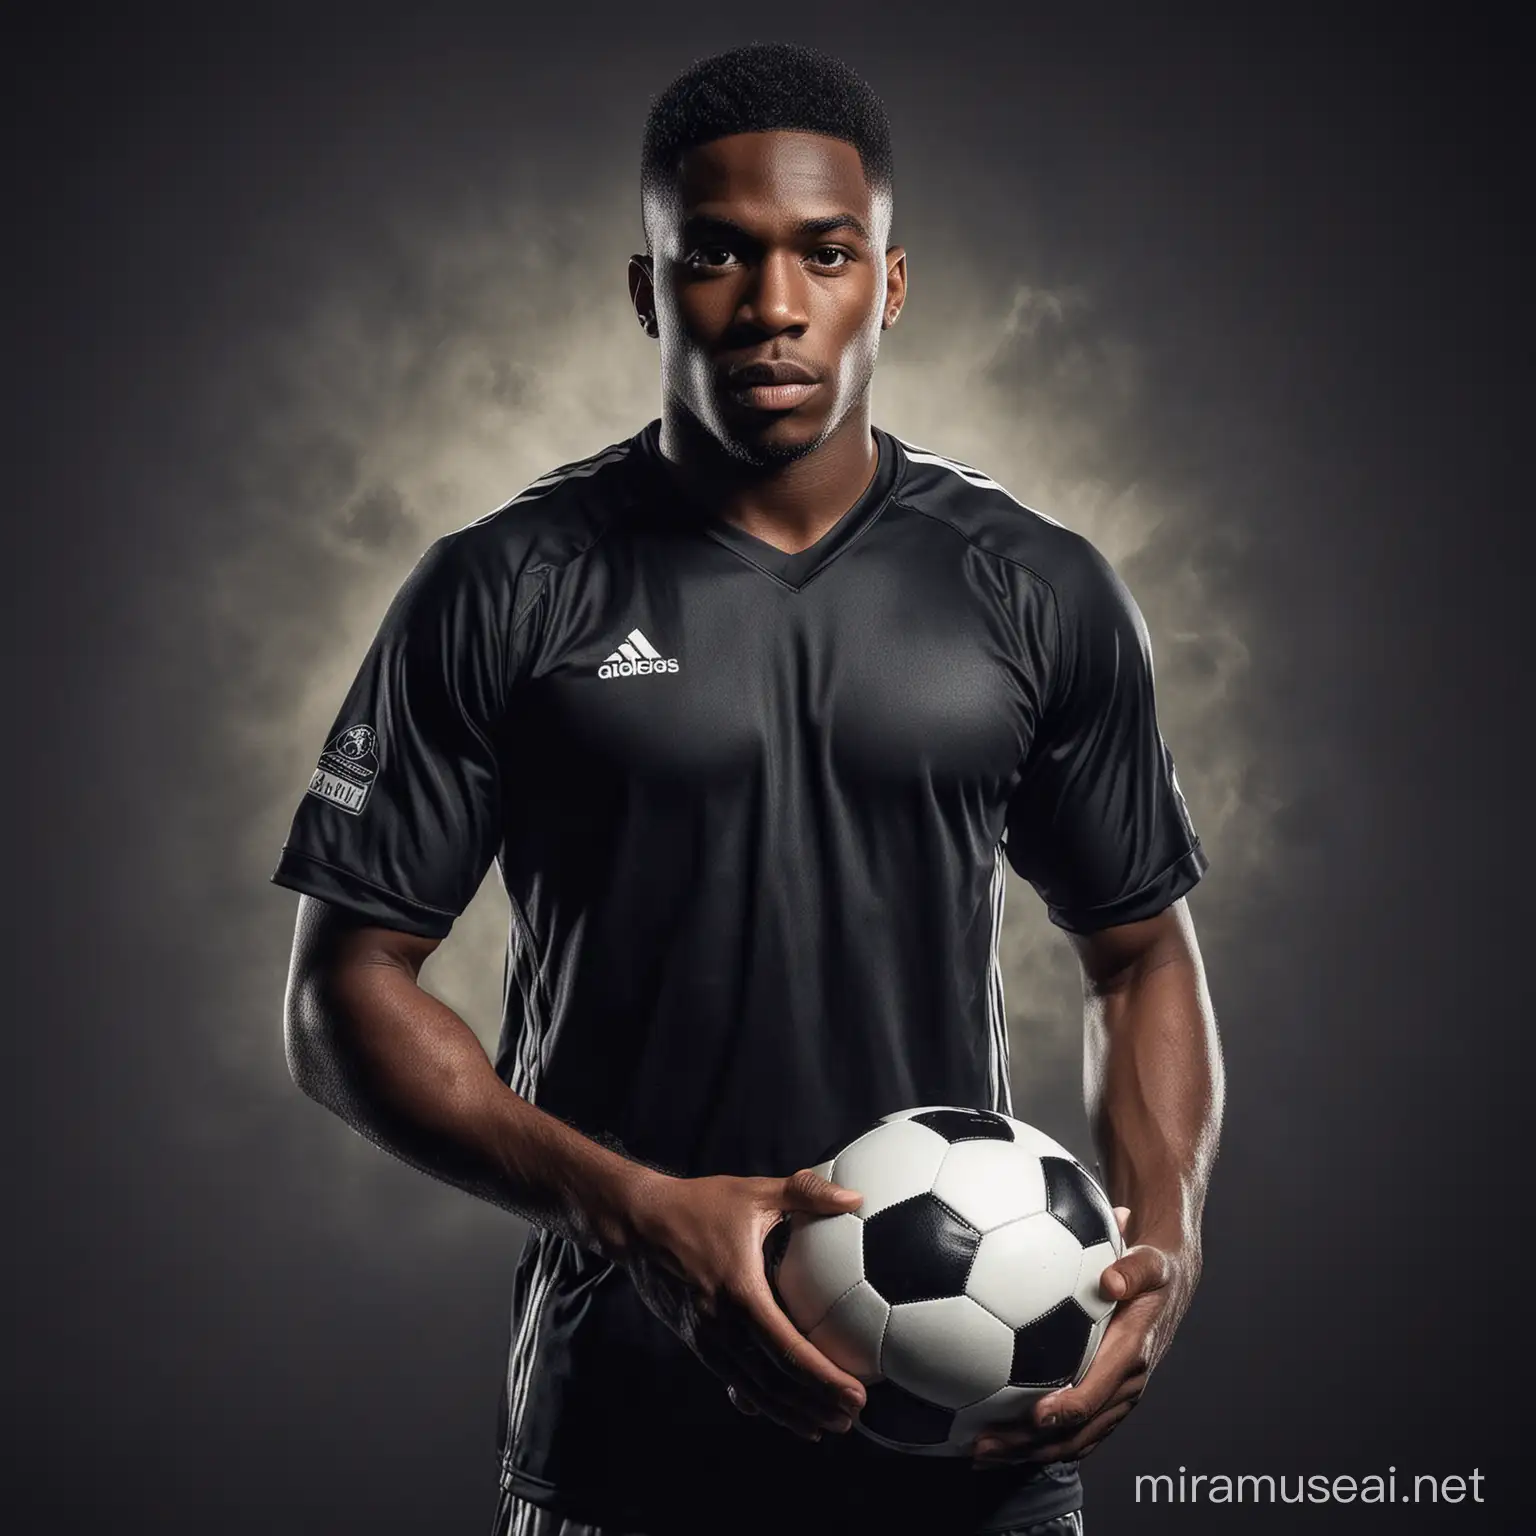 Determined Black Soccer Player with Football Against Dramatic Background